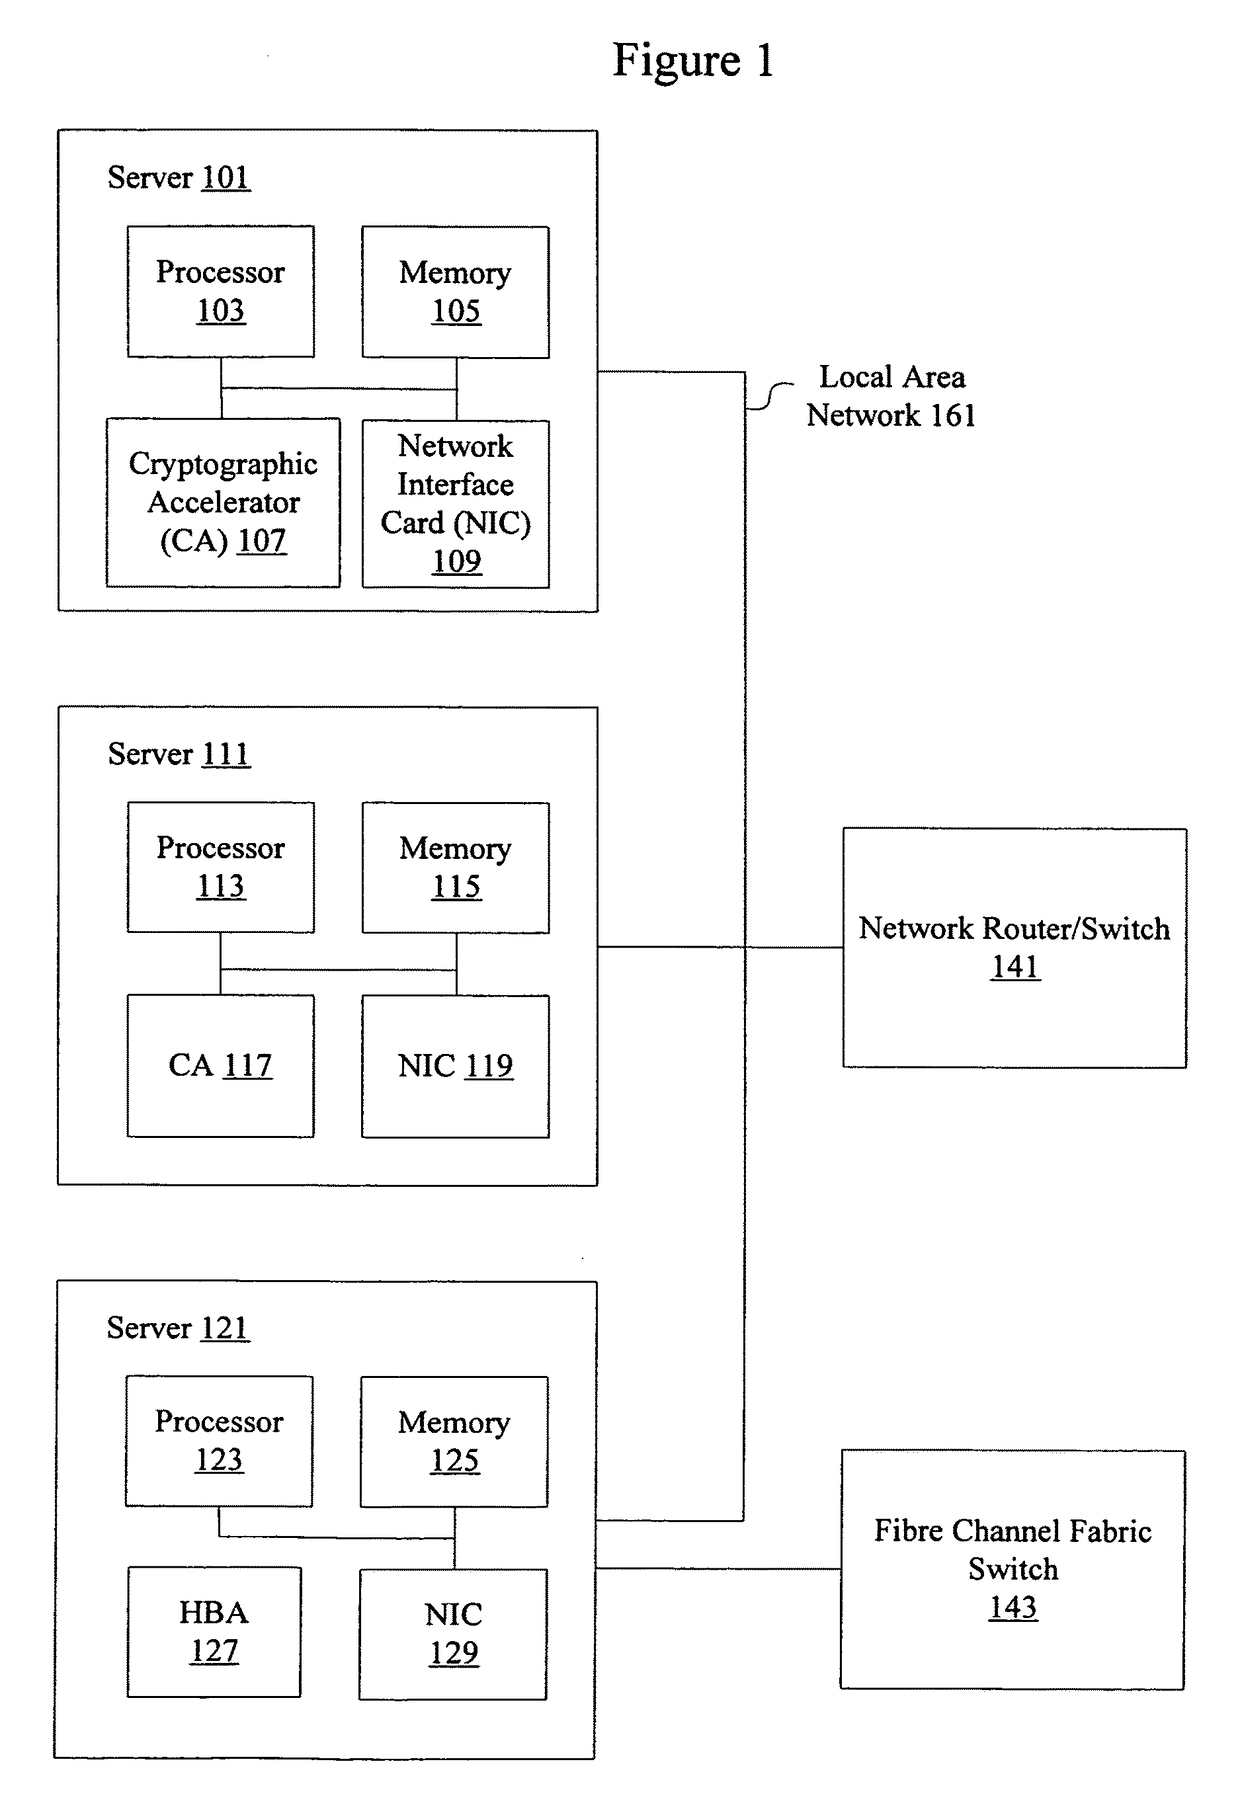 Efficient data transfer between servers and remote peripherals